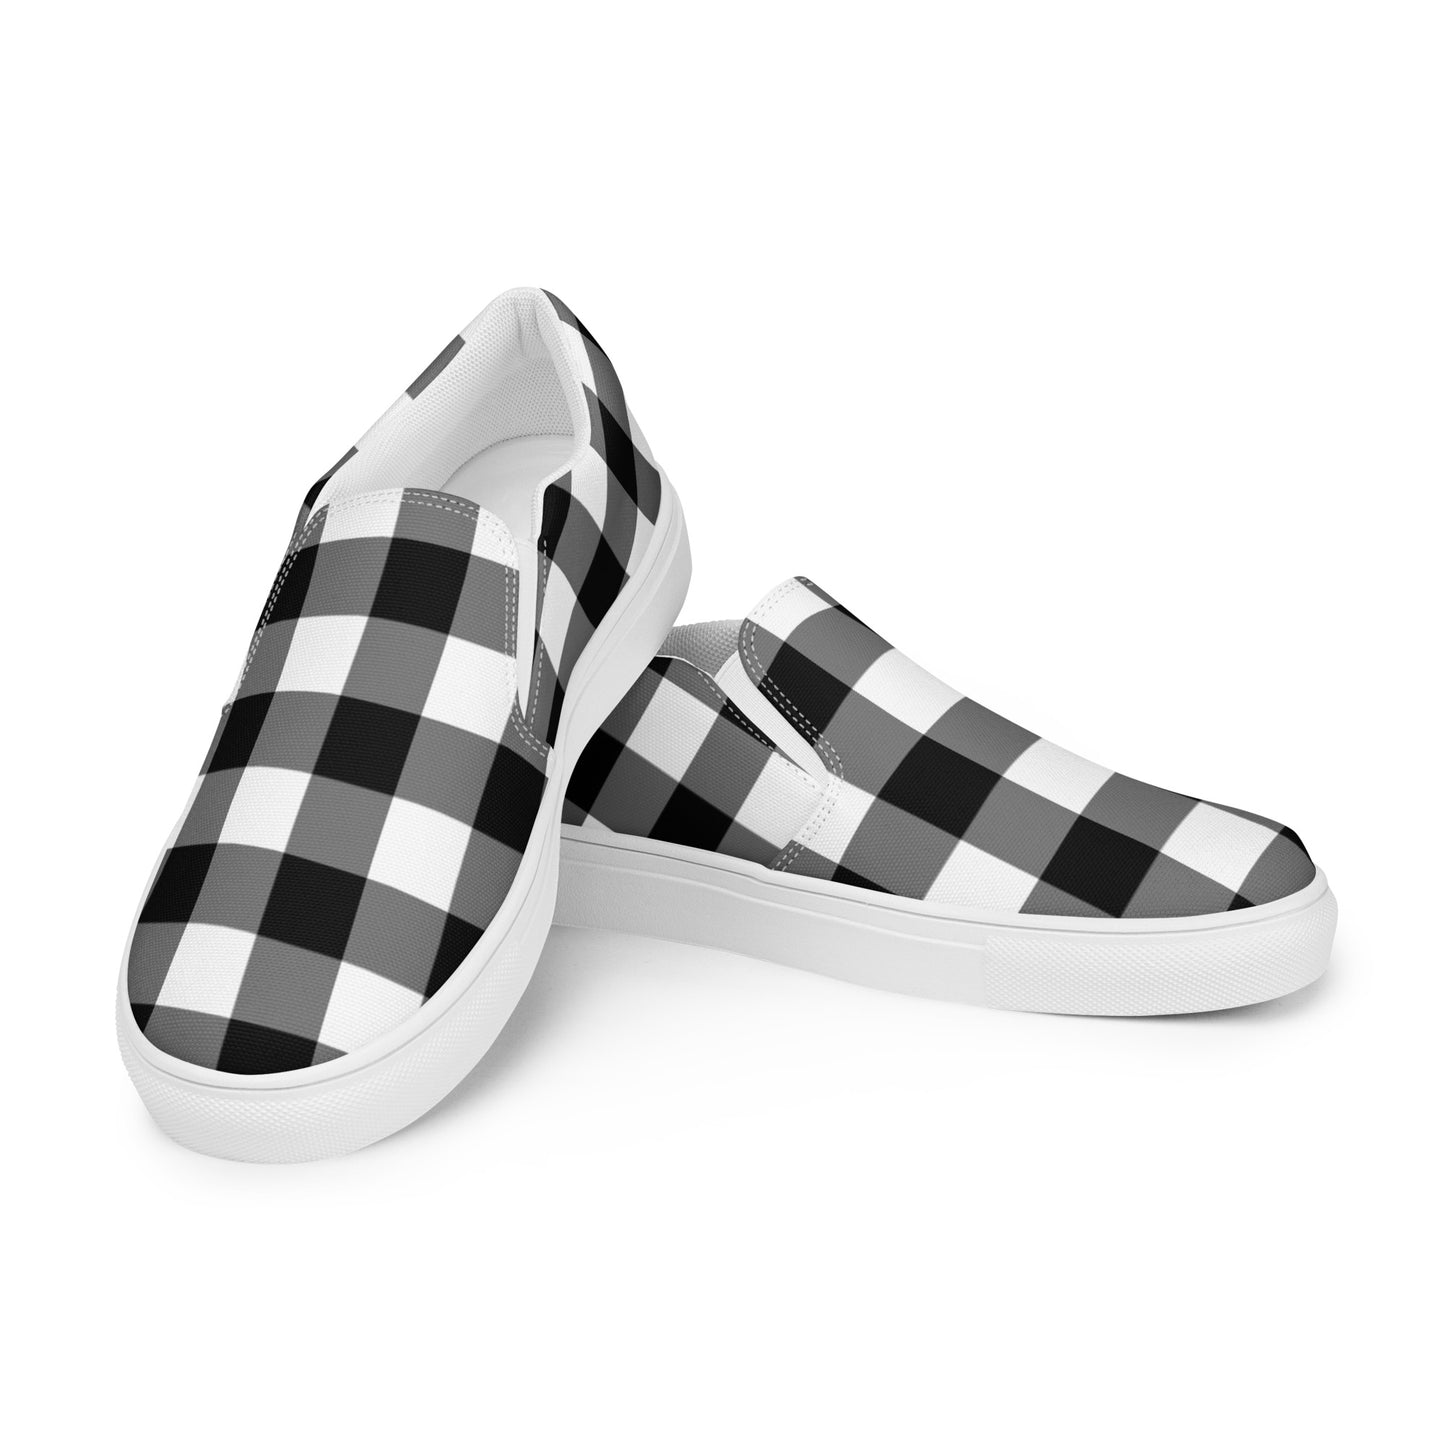 Badass Black Gingham Women’s Canvas Slip-On Flat Deck Shoe | Pinup Couture Relaxed